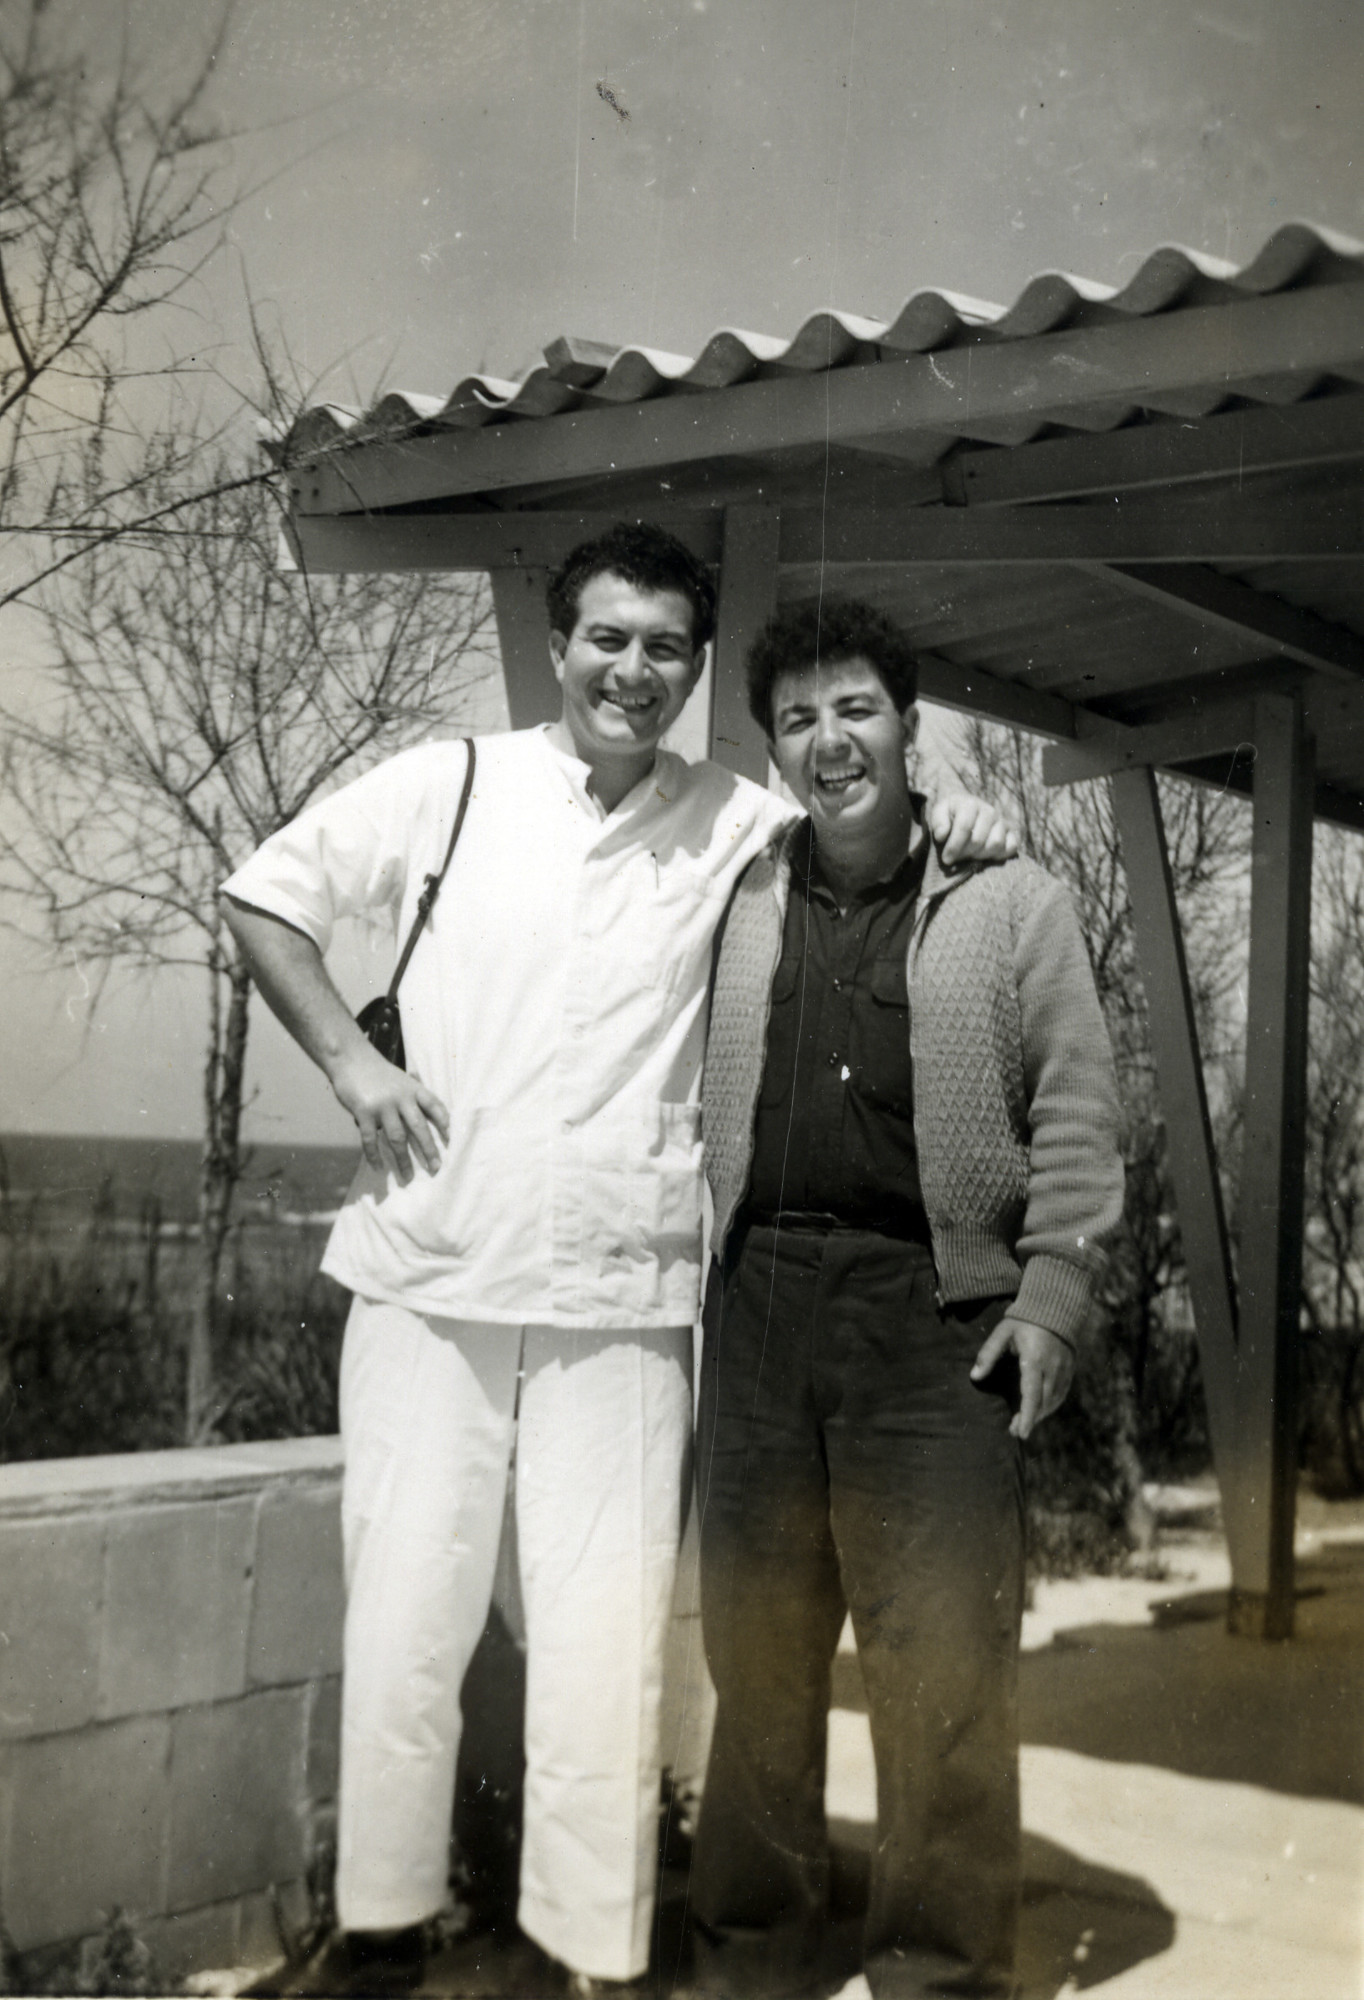 Avraham Ofek (right) and his older brother Meir meet for the first time since Avraham was adopted as a baby.

The reunion took place at the Donelo hospital where Meir was a physician.